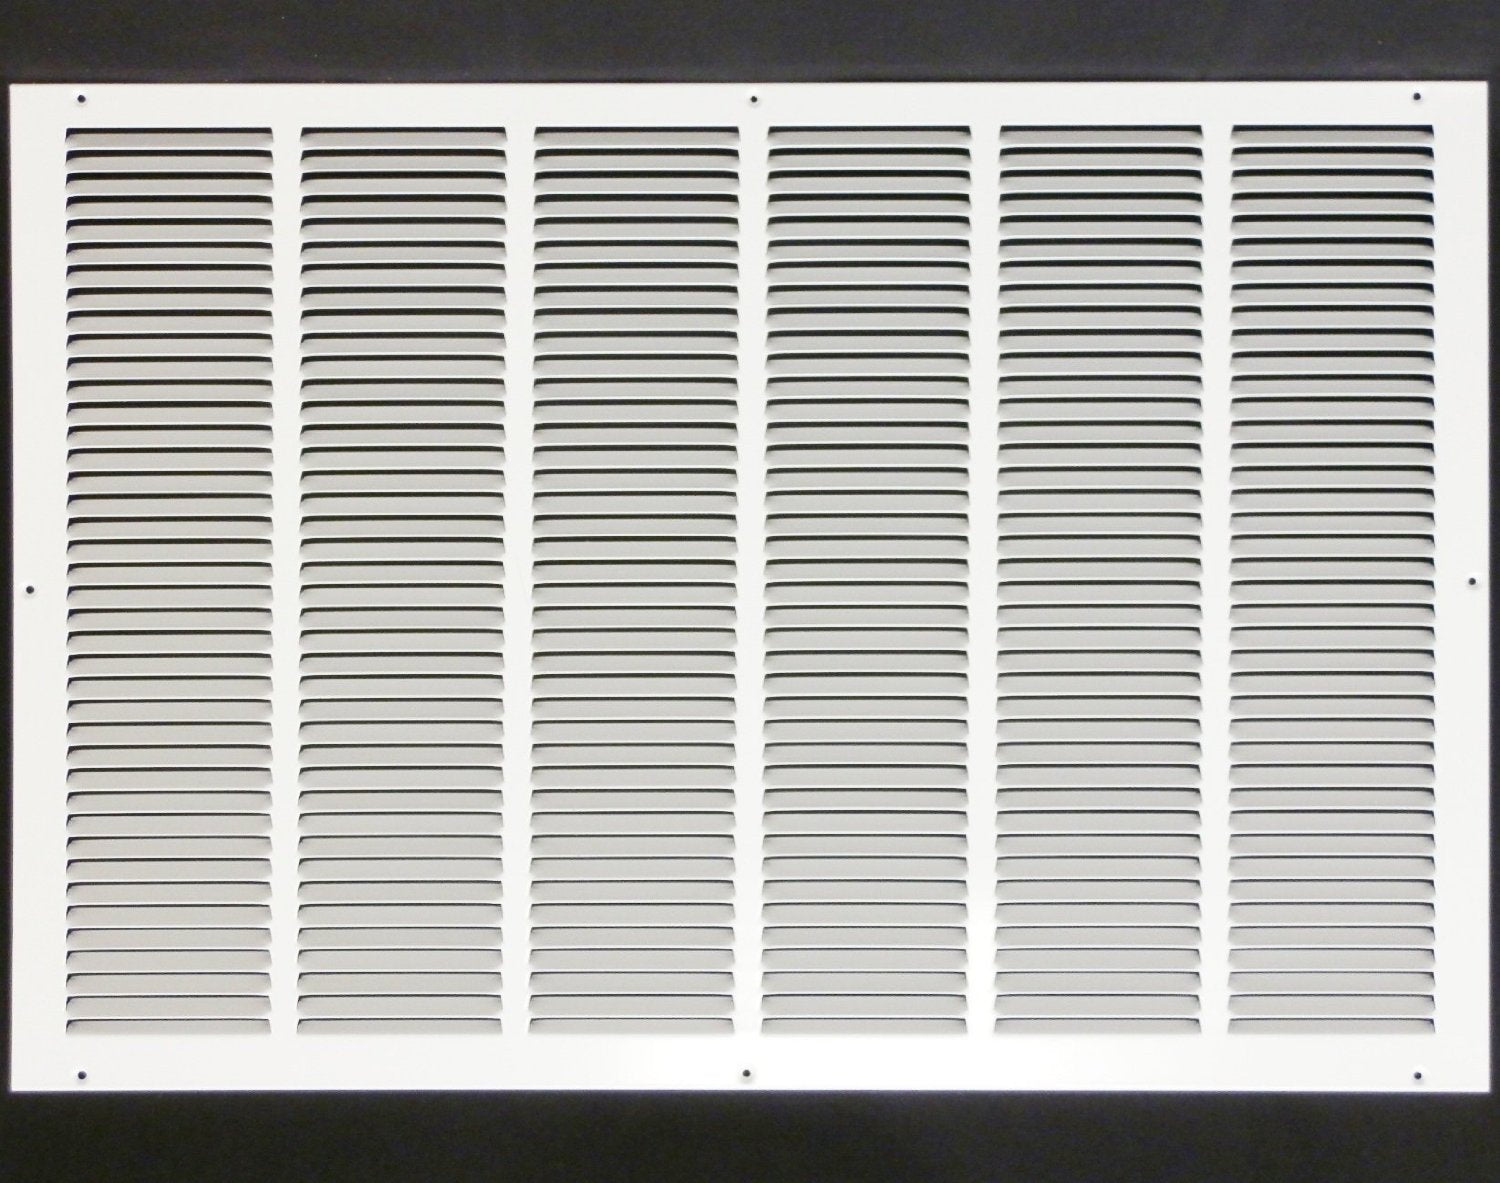 30" X 25" Air Vent Return Grilles - Sidewall and Ceiling - Steel